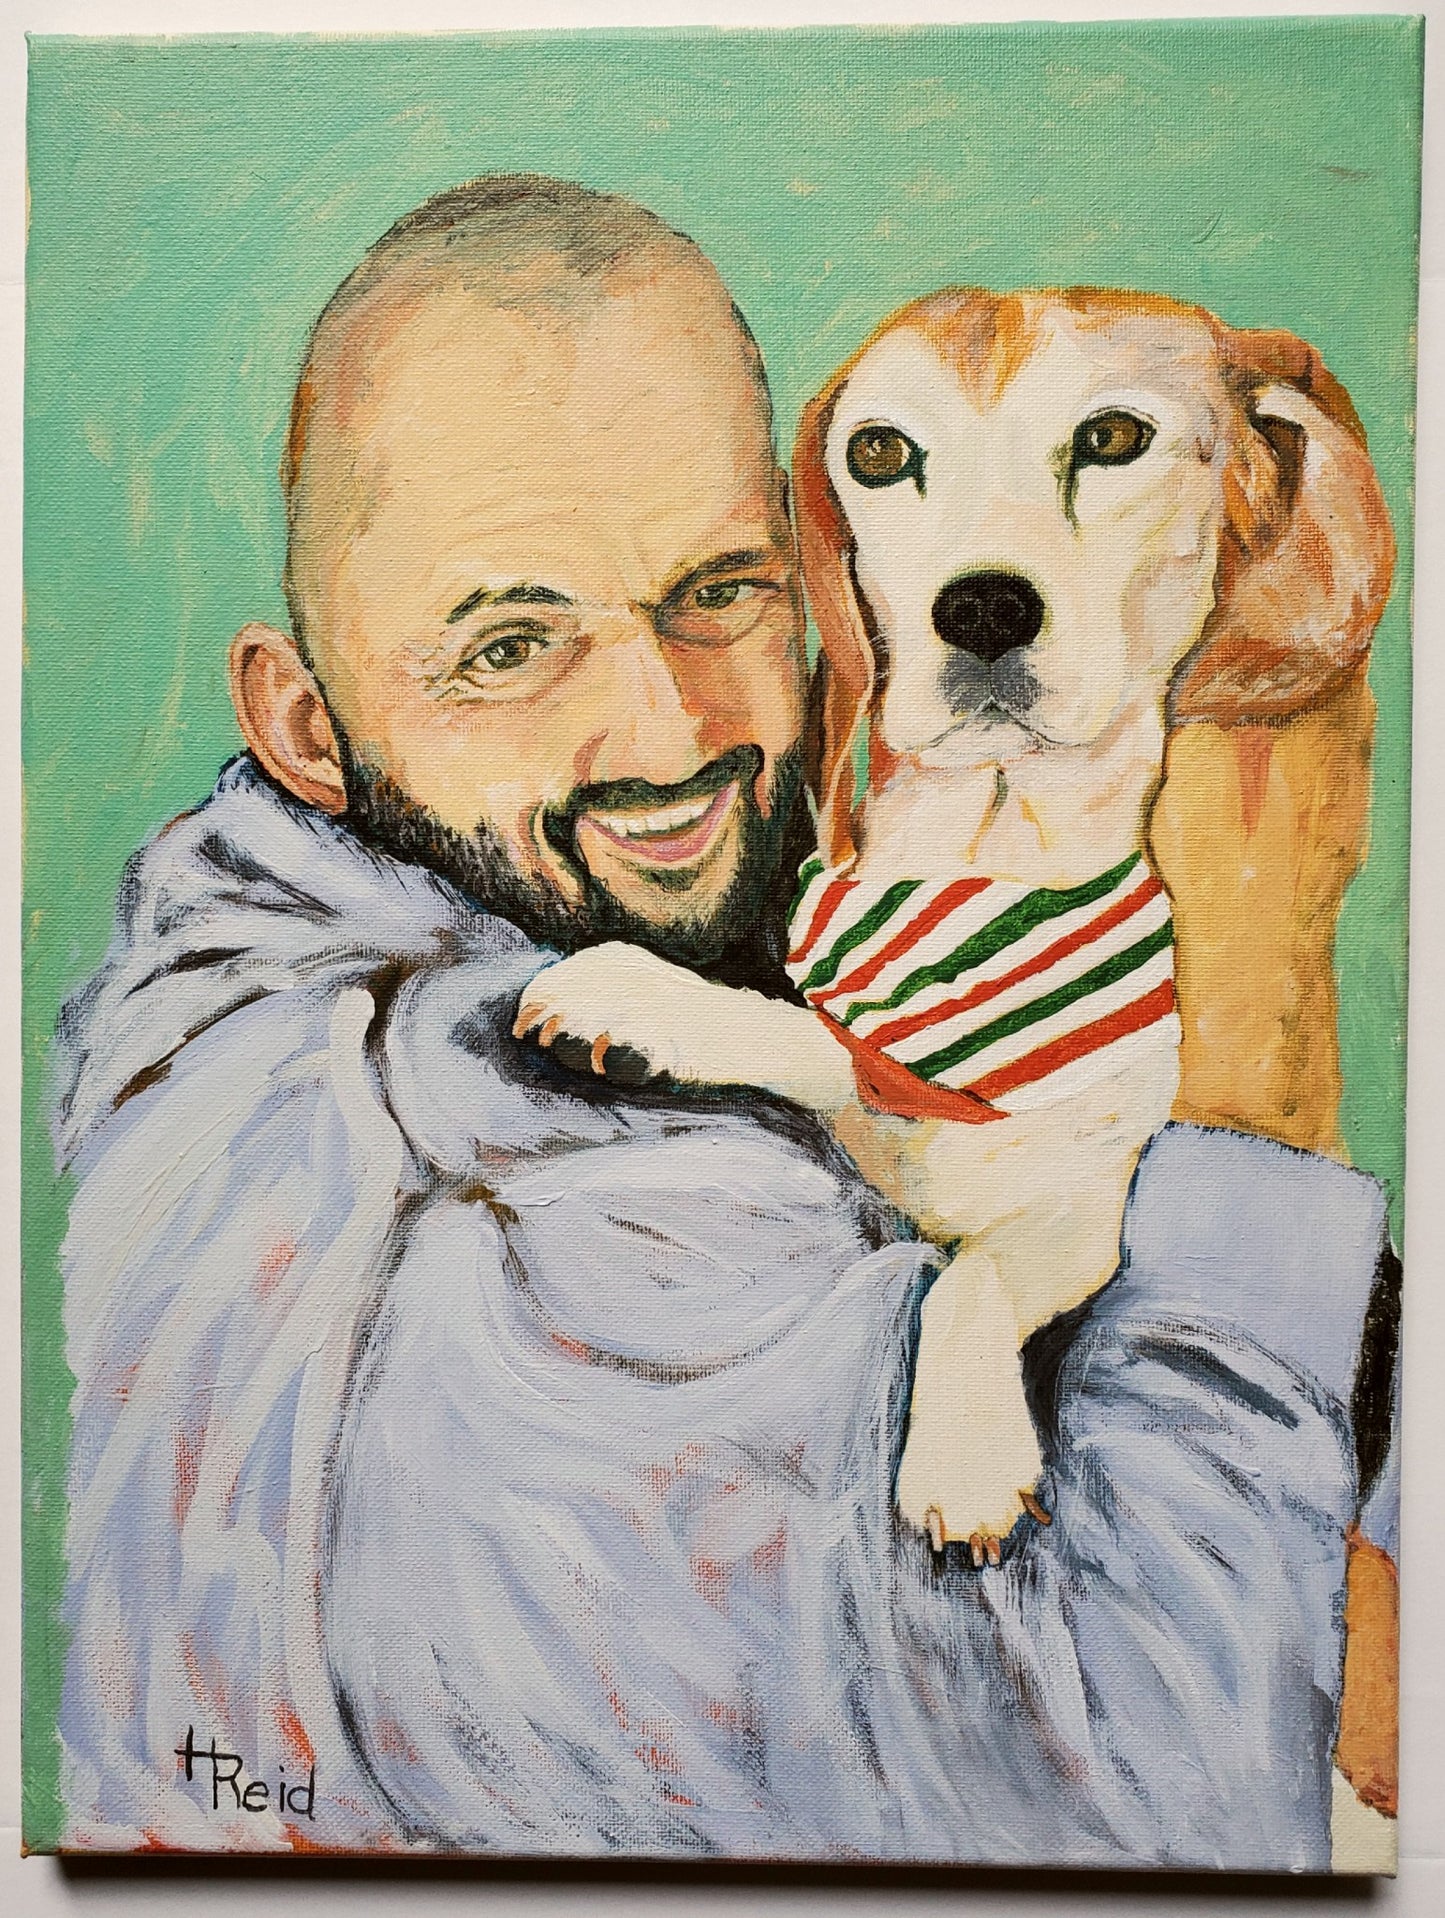 Jim and Fredo, Commission, 16" x 20" Wrapped Canvas, Acrylic Painting